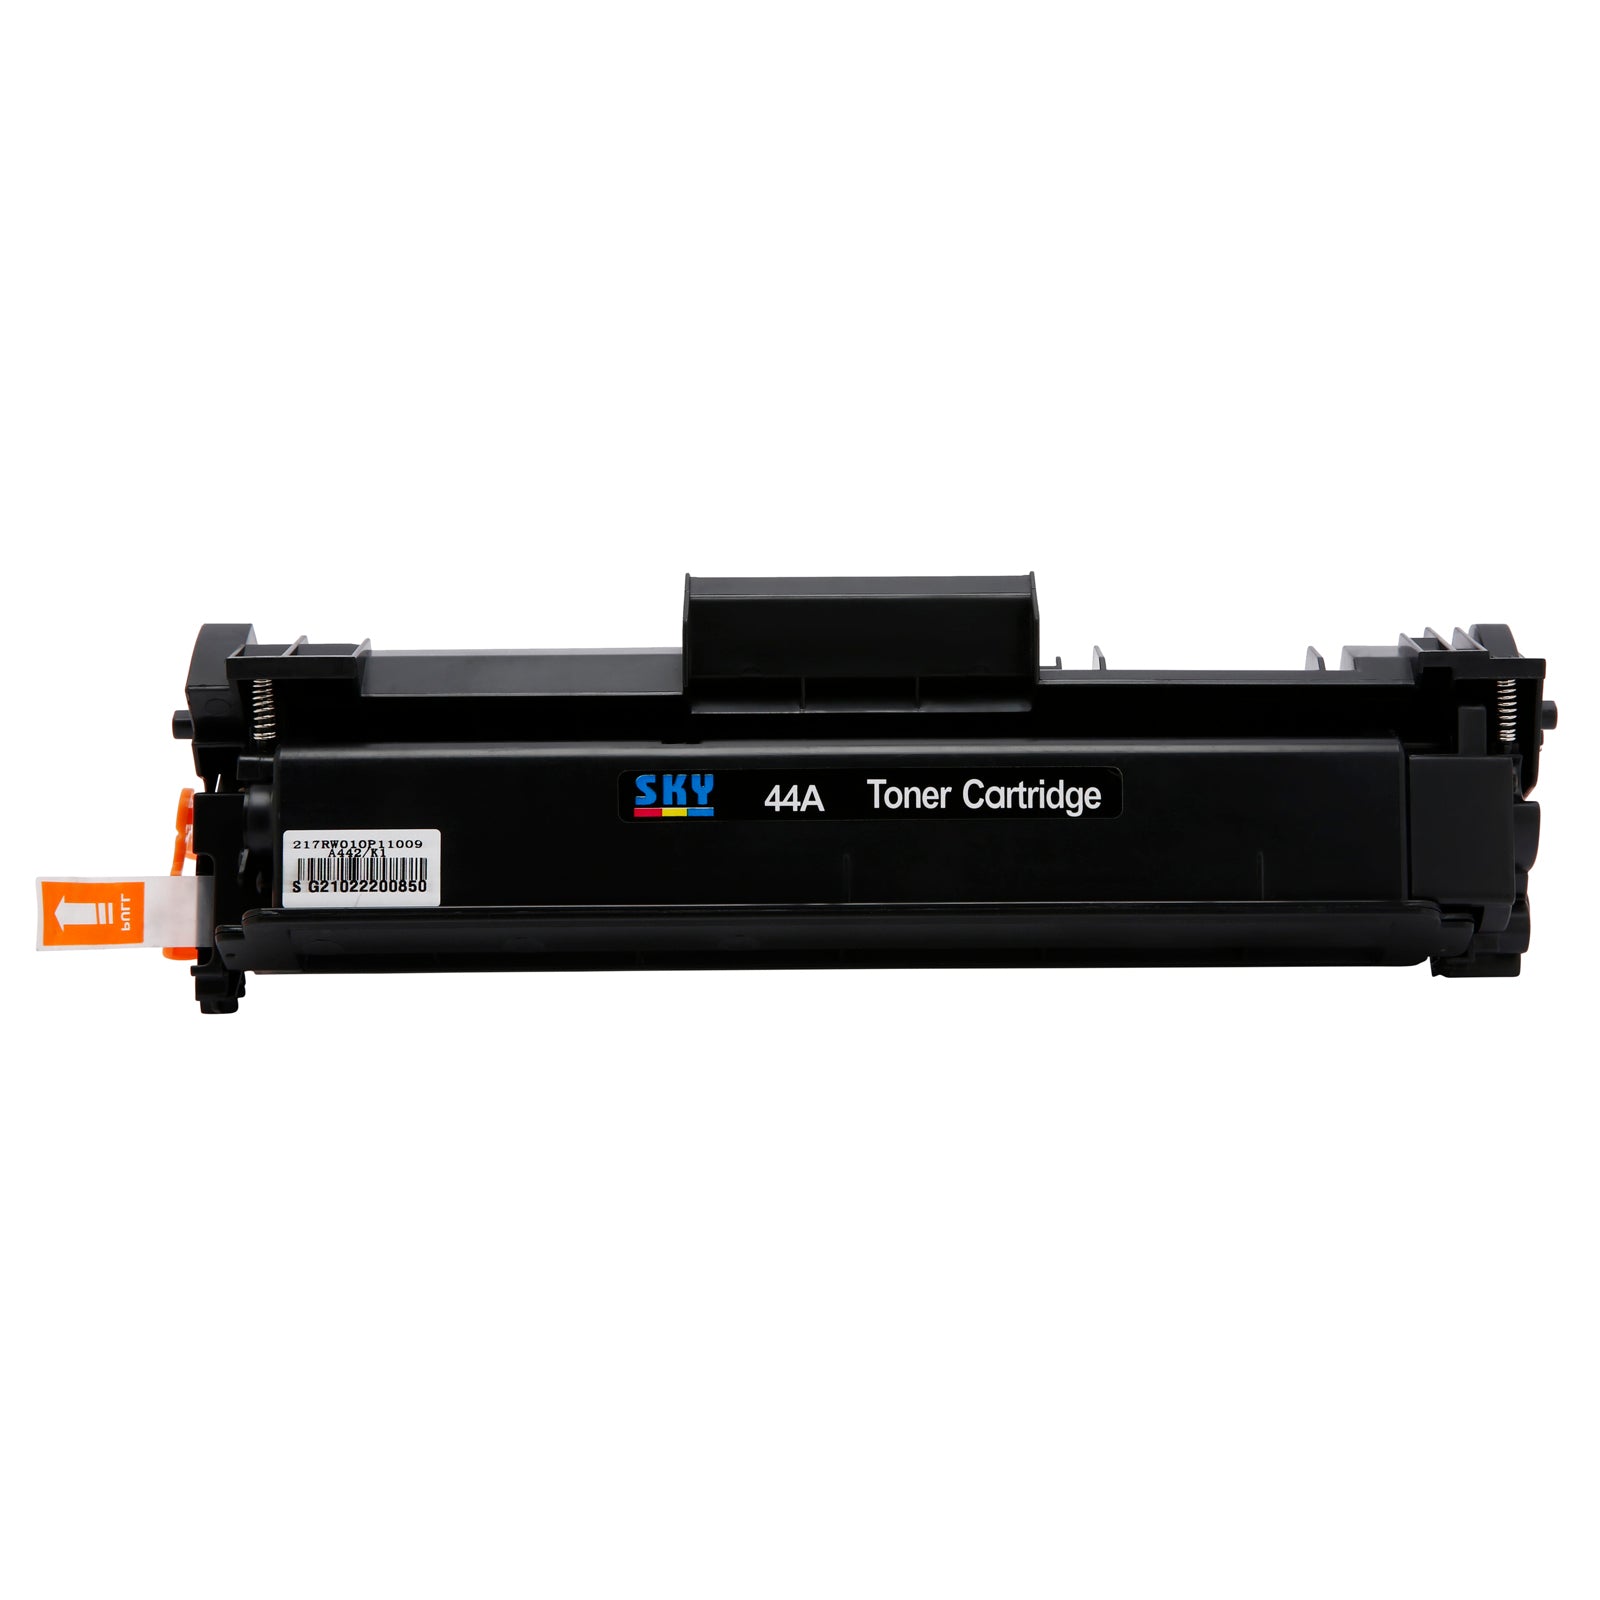 SKY 44A Toner Cartridge CF244A for M15 and MFP M28 Printers